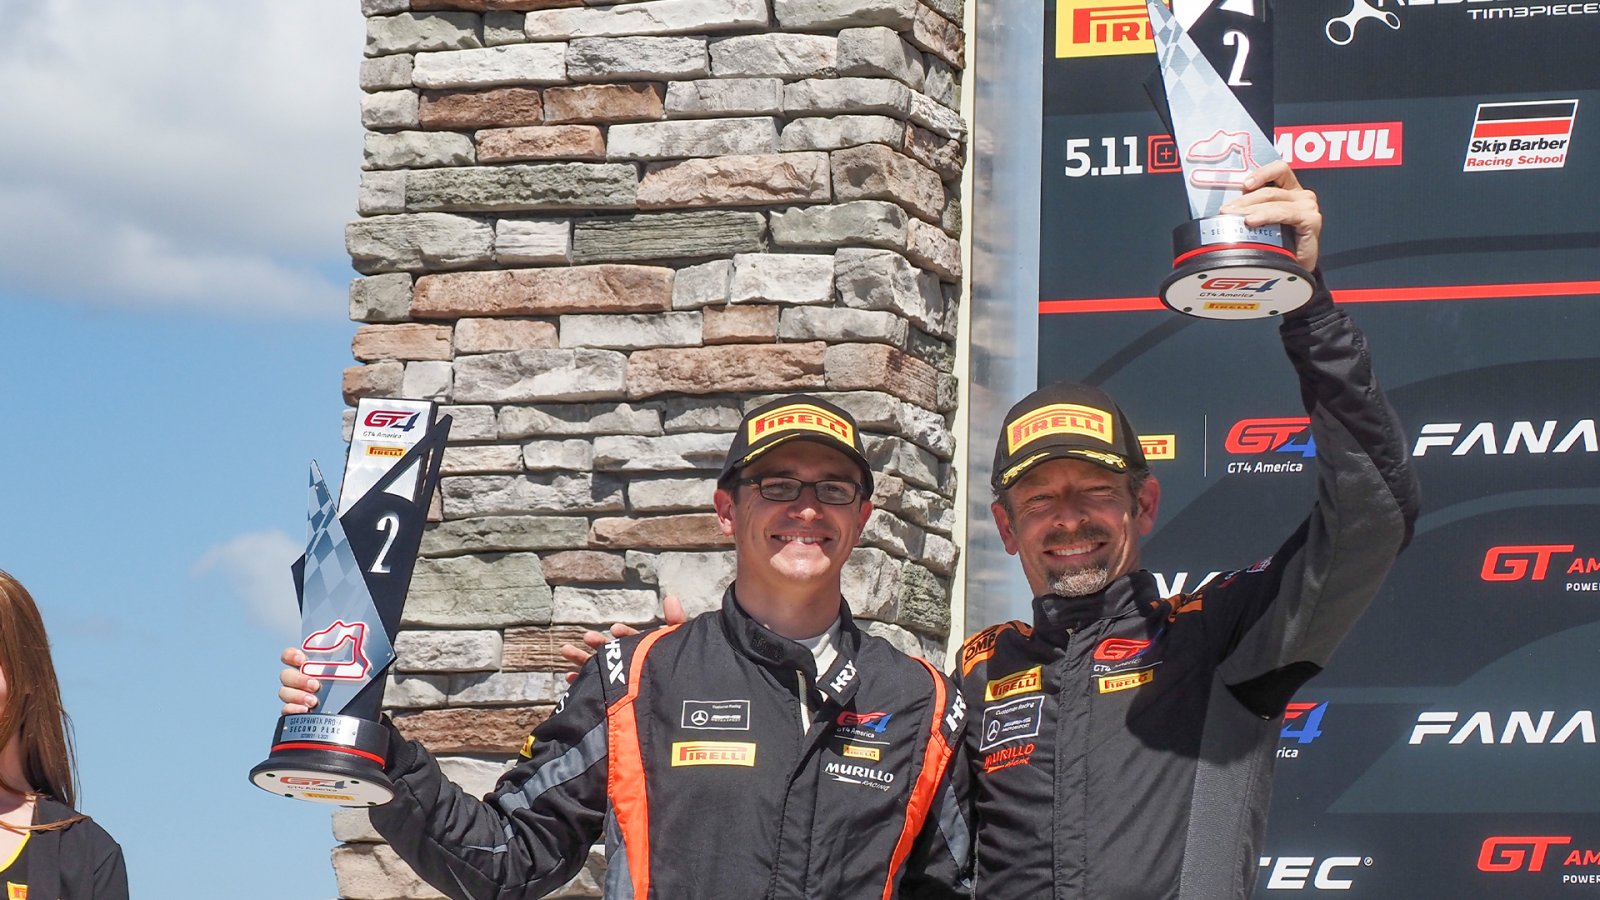 Mercedes-AMG Motorsport Customer Racing Teams Clinch 2021 Pirelli GT4 America Silver-Class Championships and Secure Overall Pirelli GT4 Weekend Race-Win Sweep and One-Two Silver Class Finishes at Sebring International Raceway